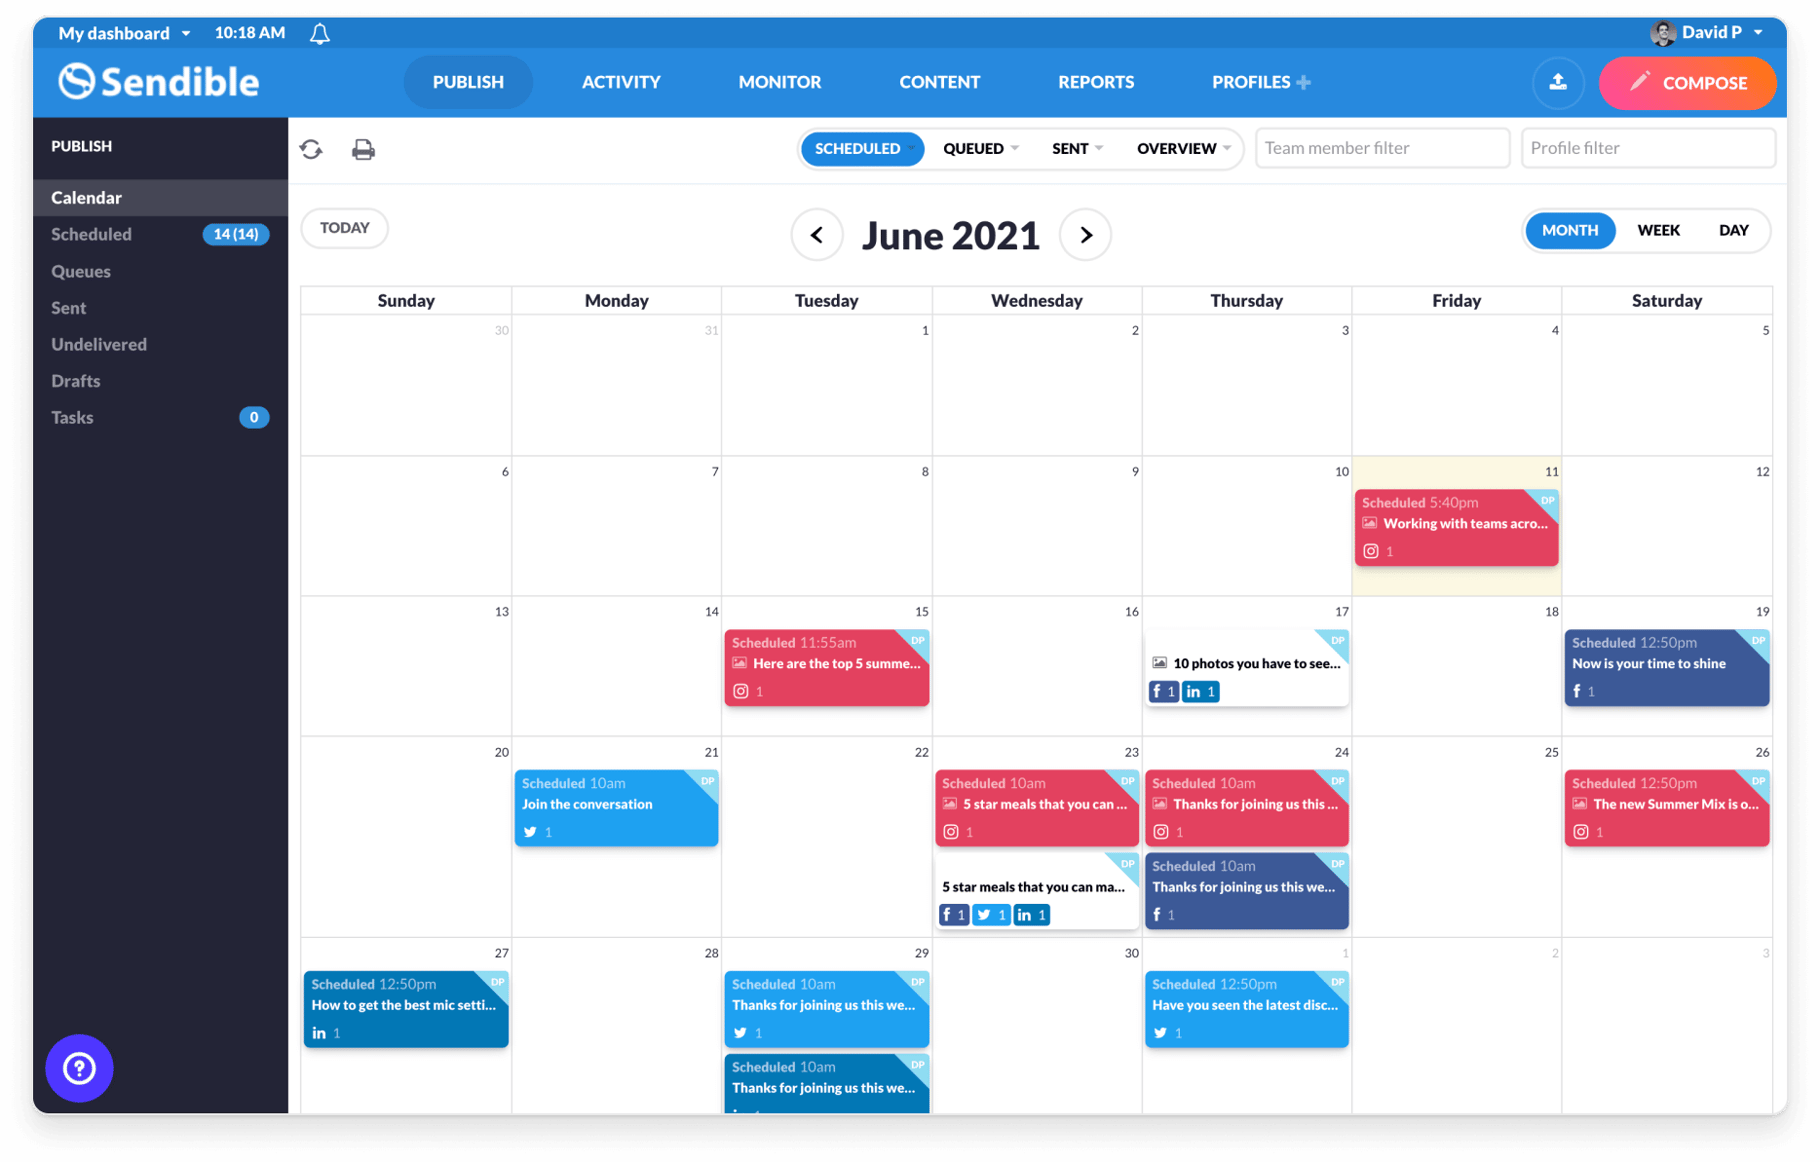 sendible calendar view with scheduled posts